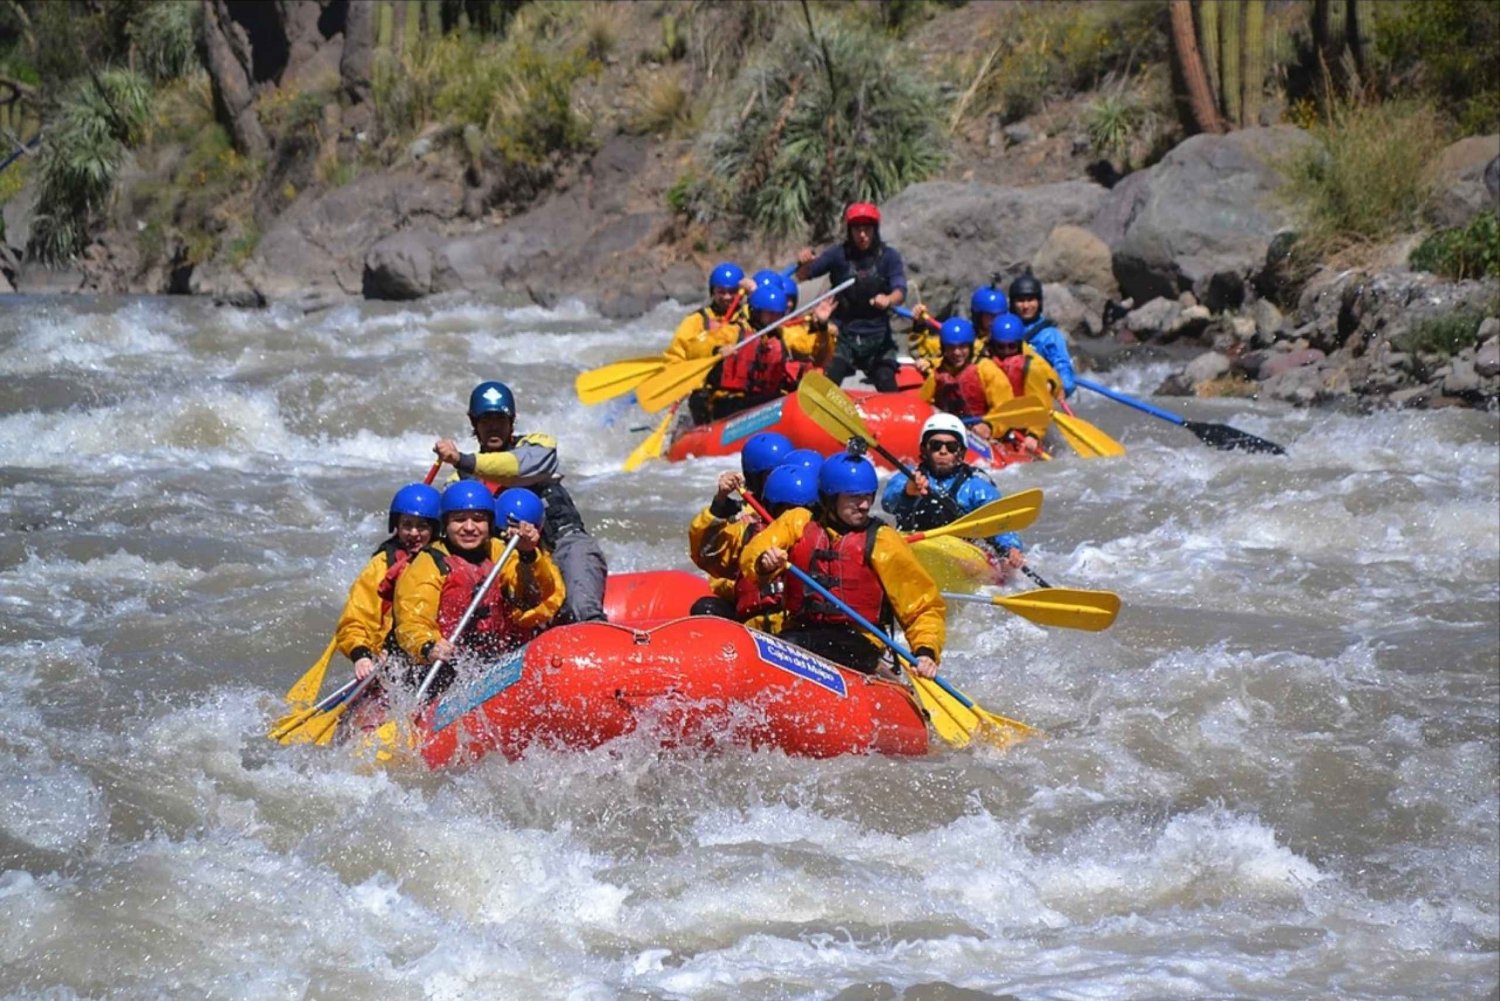 From Santiago: Rafting in the Maipo Canyon